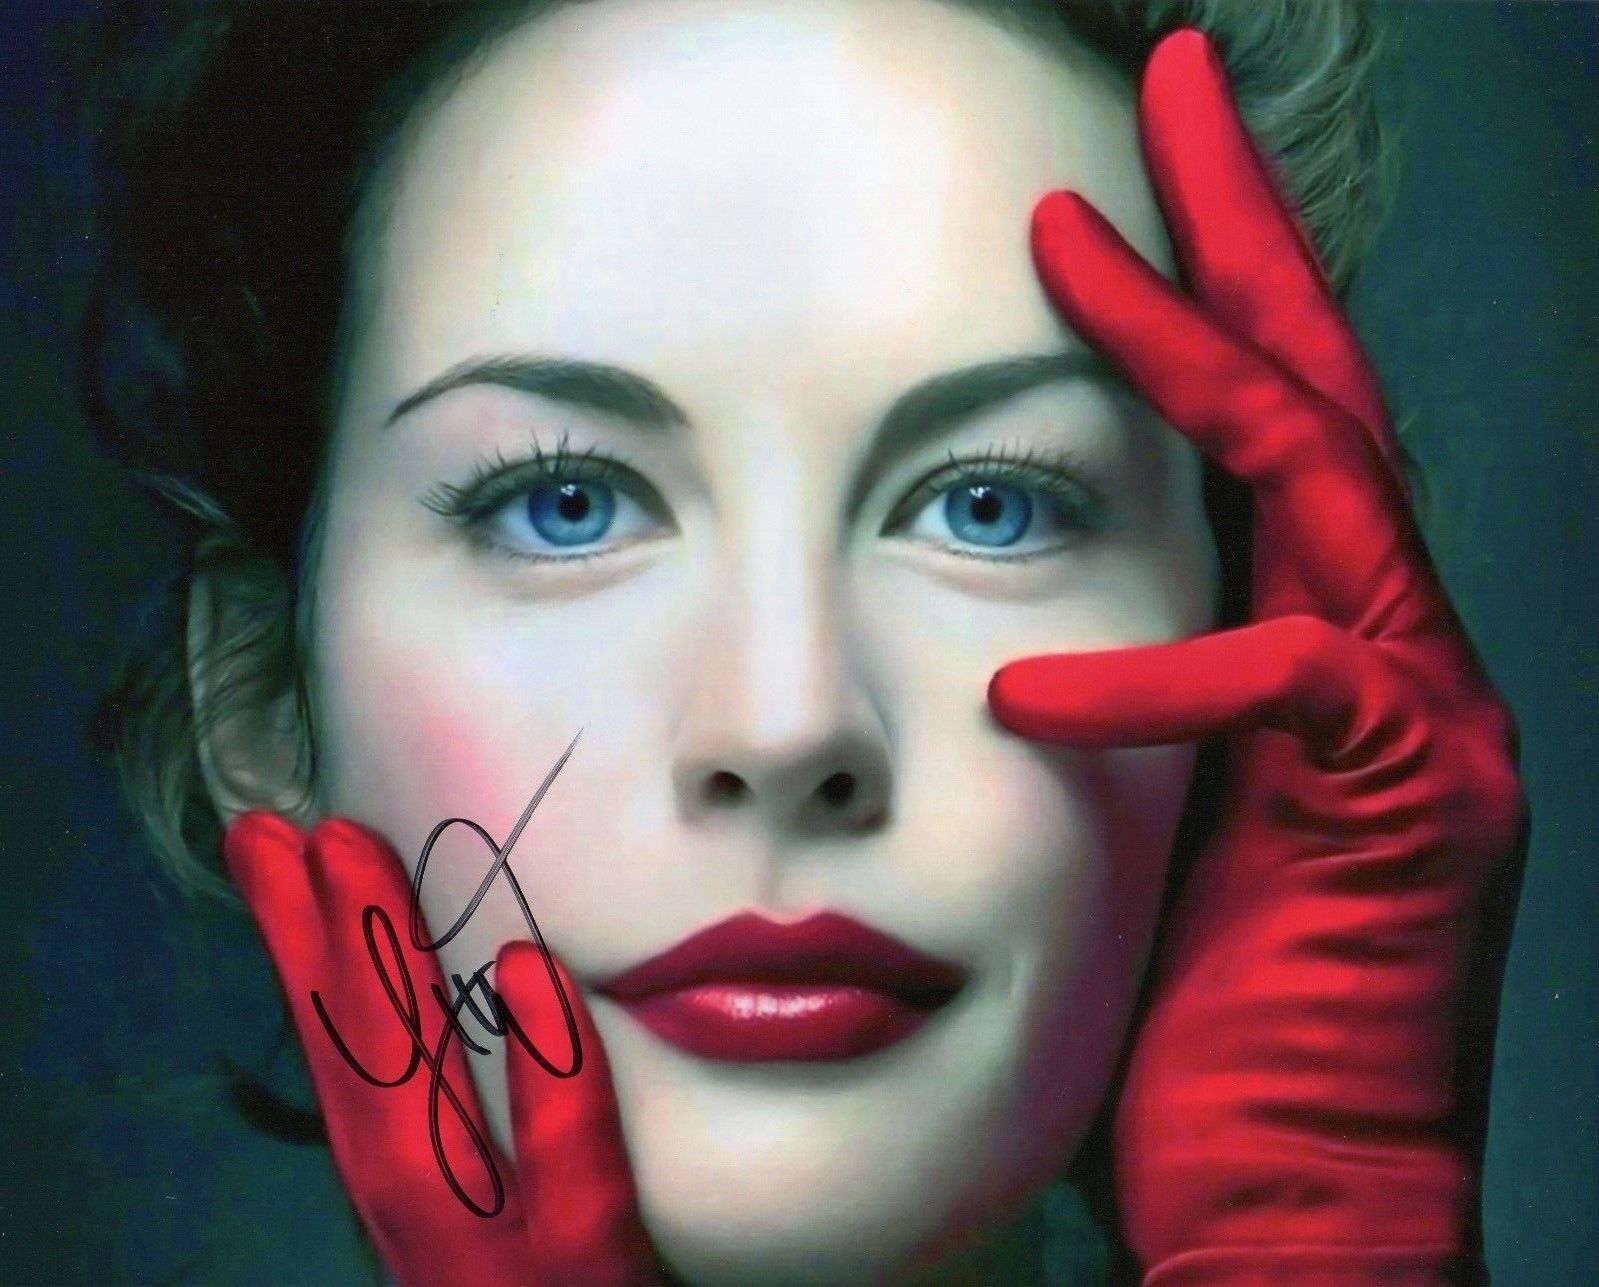 LIV TYLER AUTOGRAPHED SIGNED A4 PP POSTER Photo Poster painting PRINT 22